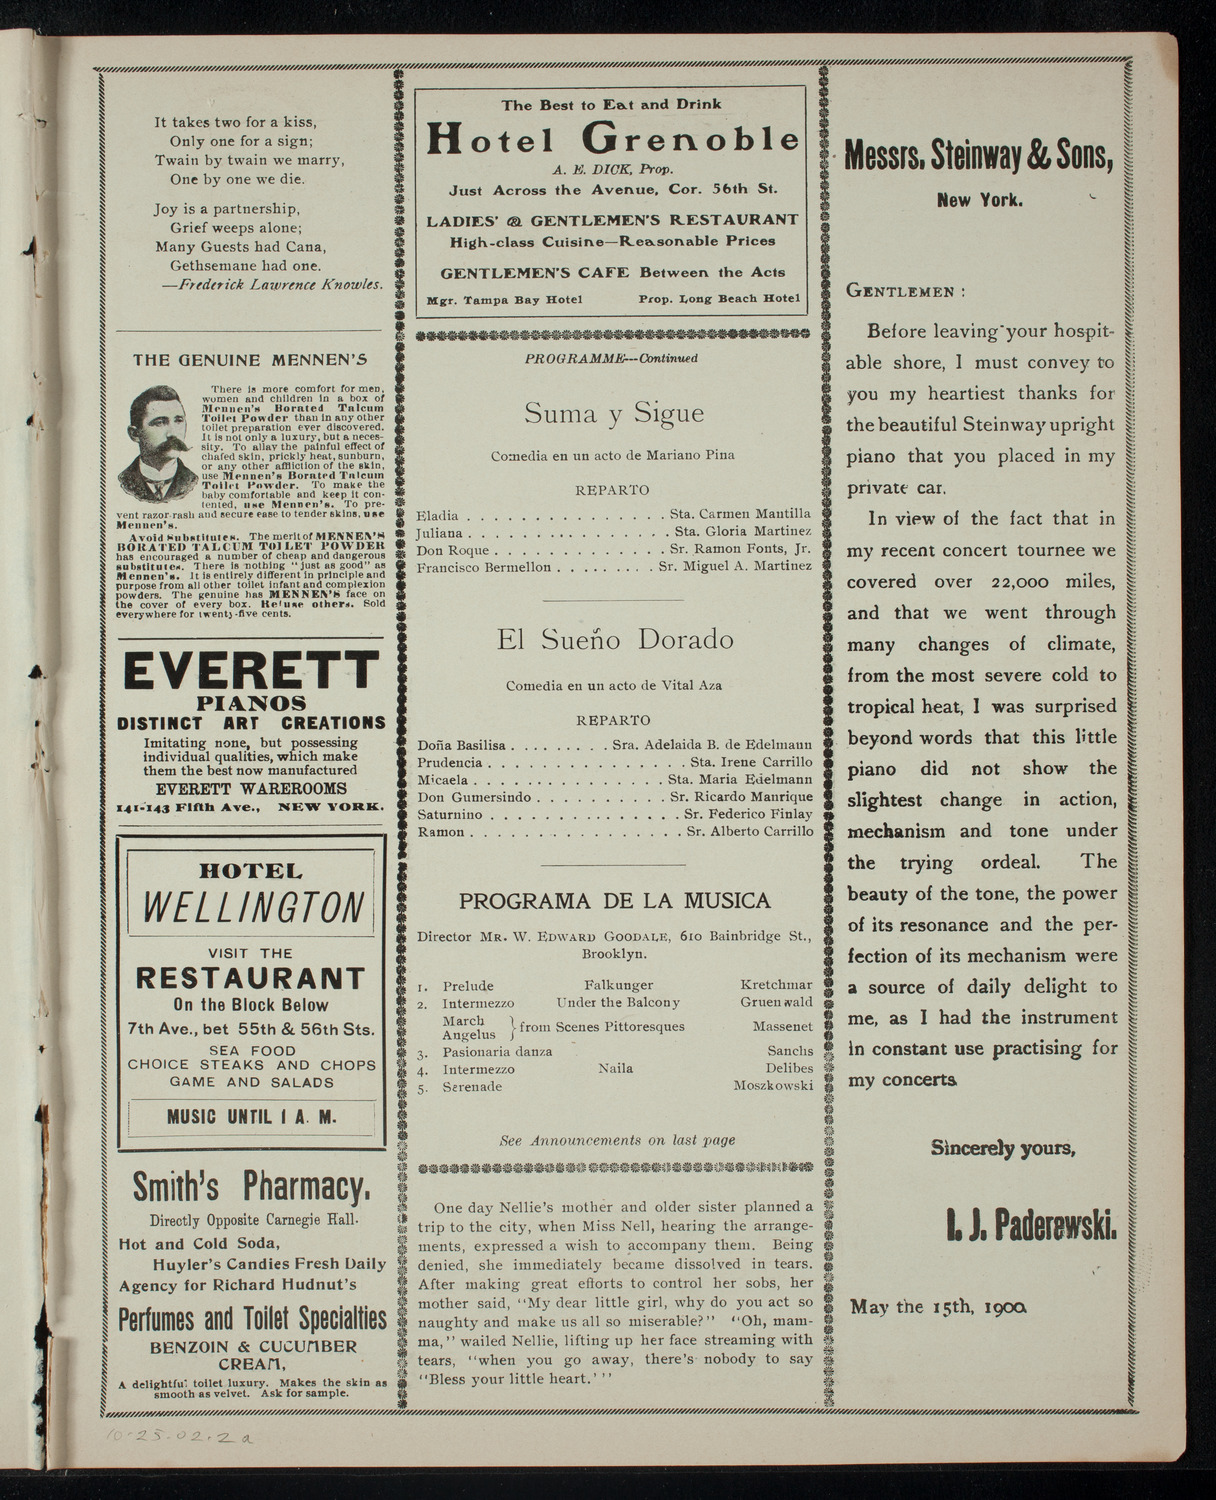 Club Social "Entre Nous" Musical and Dramatic Program, October 25, 1902, program page 3